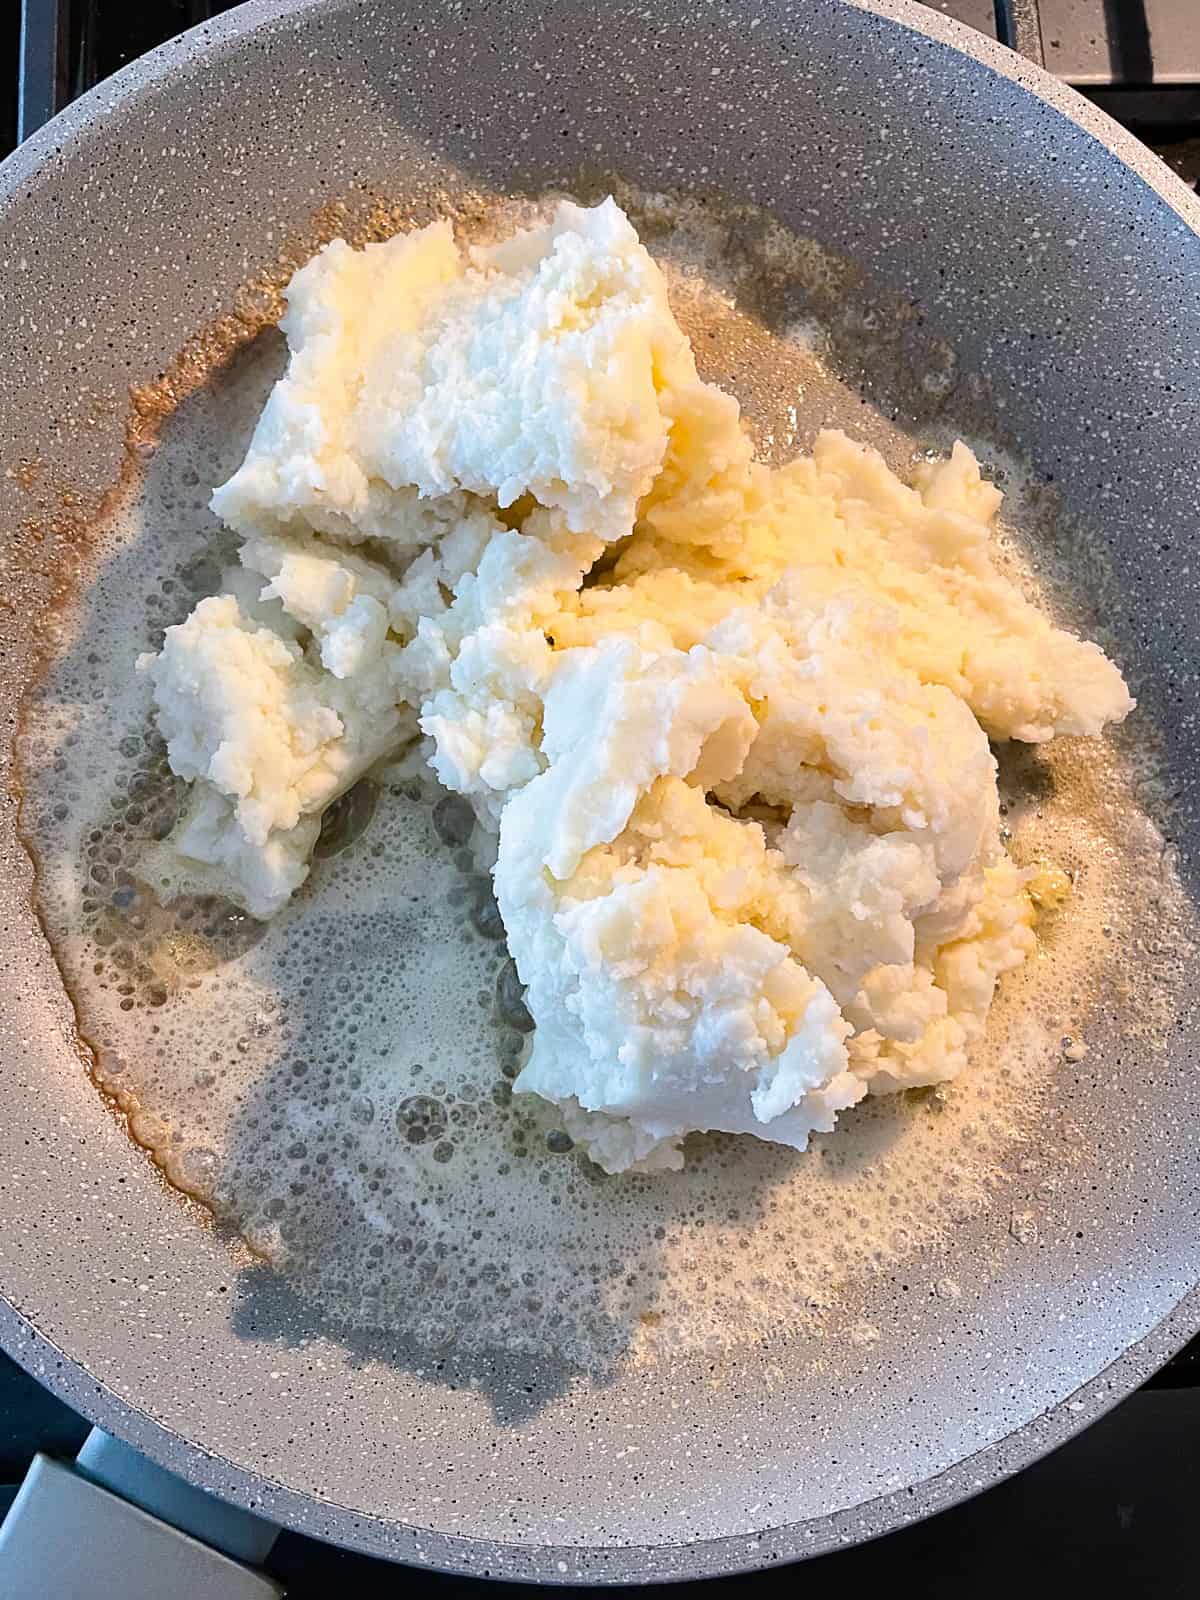 Mashed potatoes and lightly brown butter in a skillet.